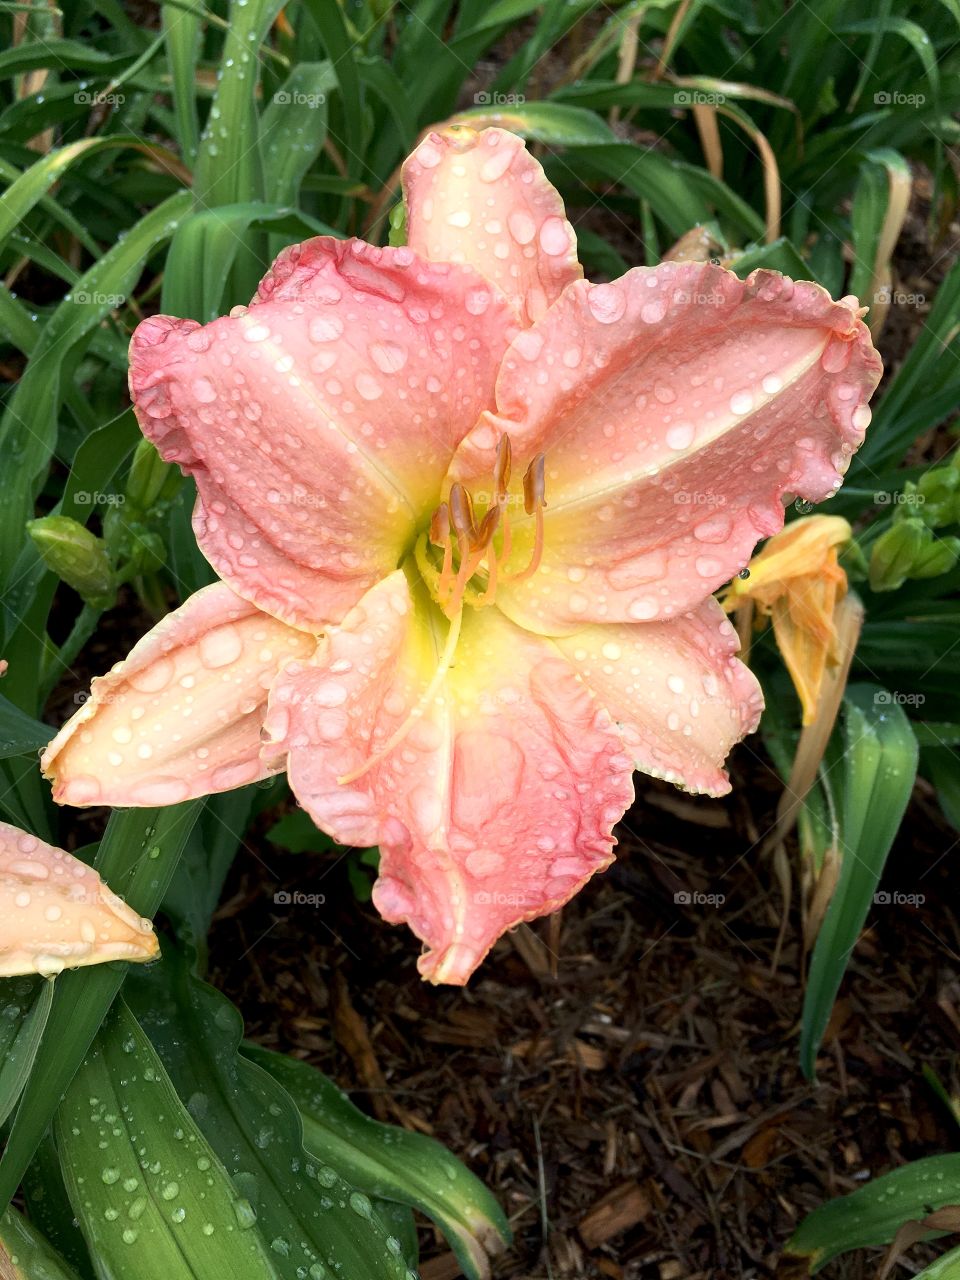 Pink Lilly bloom with water droplets after rain.